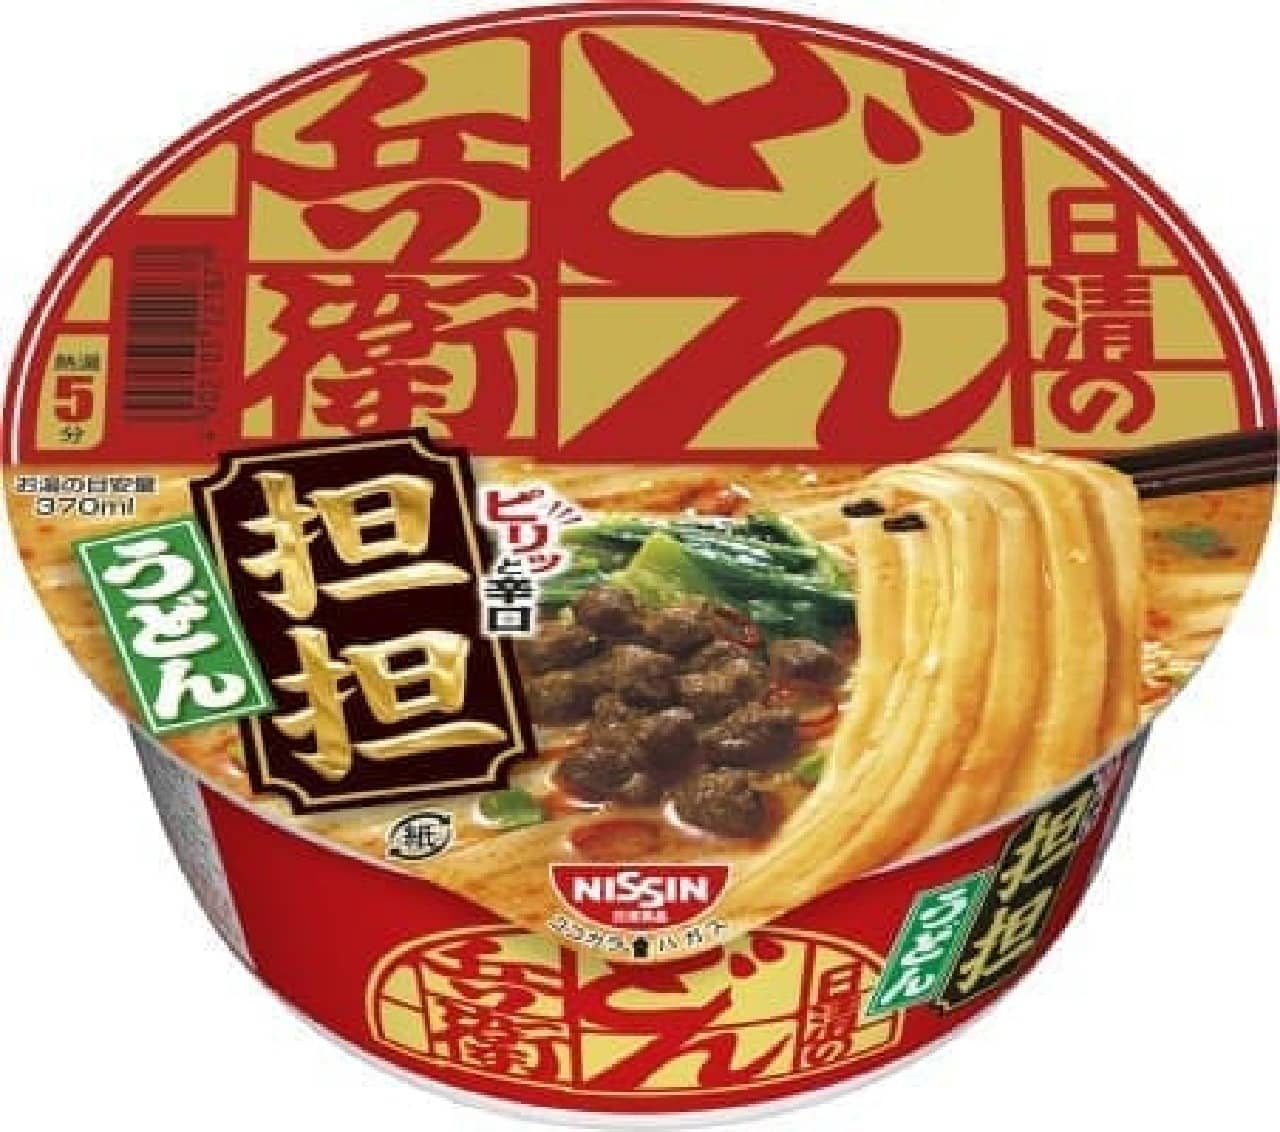 "Nissin Donbei Donbei is a dry and dry noodle"